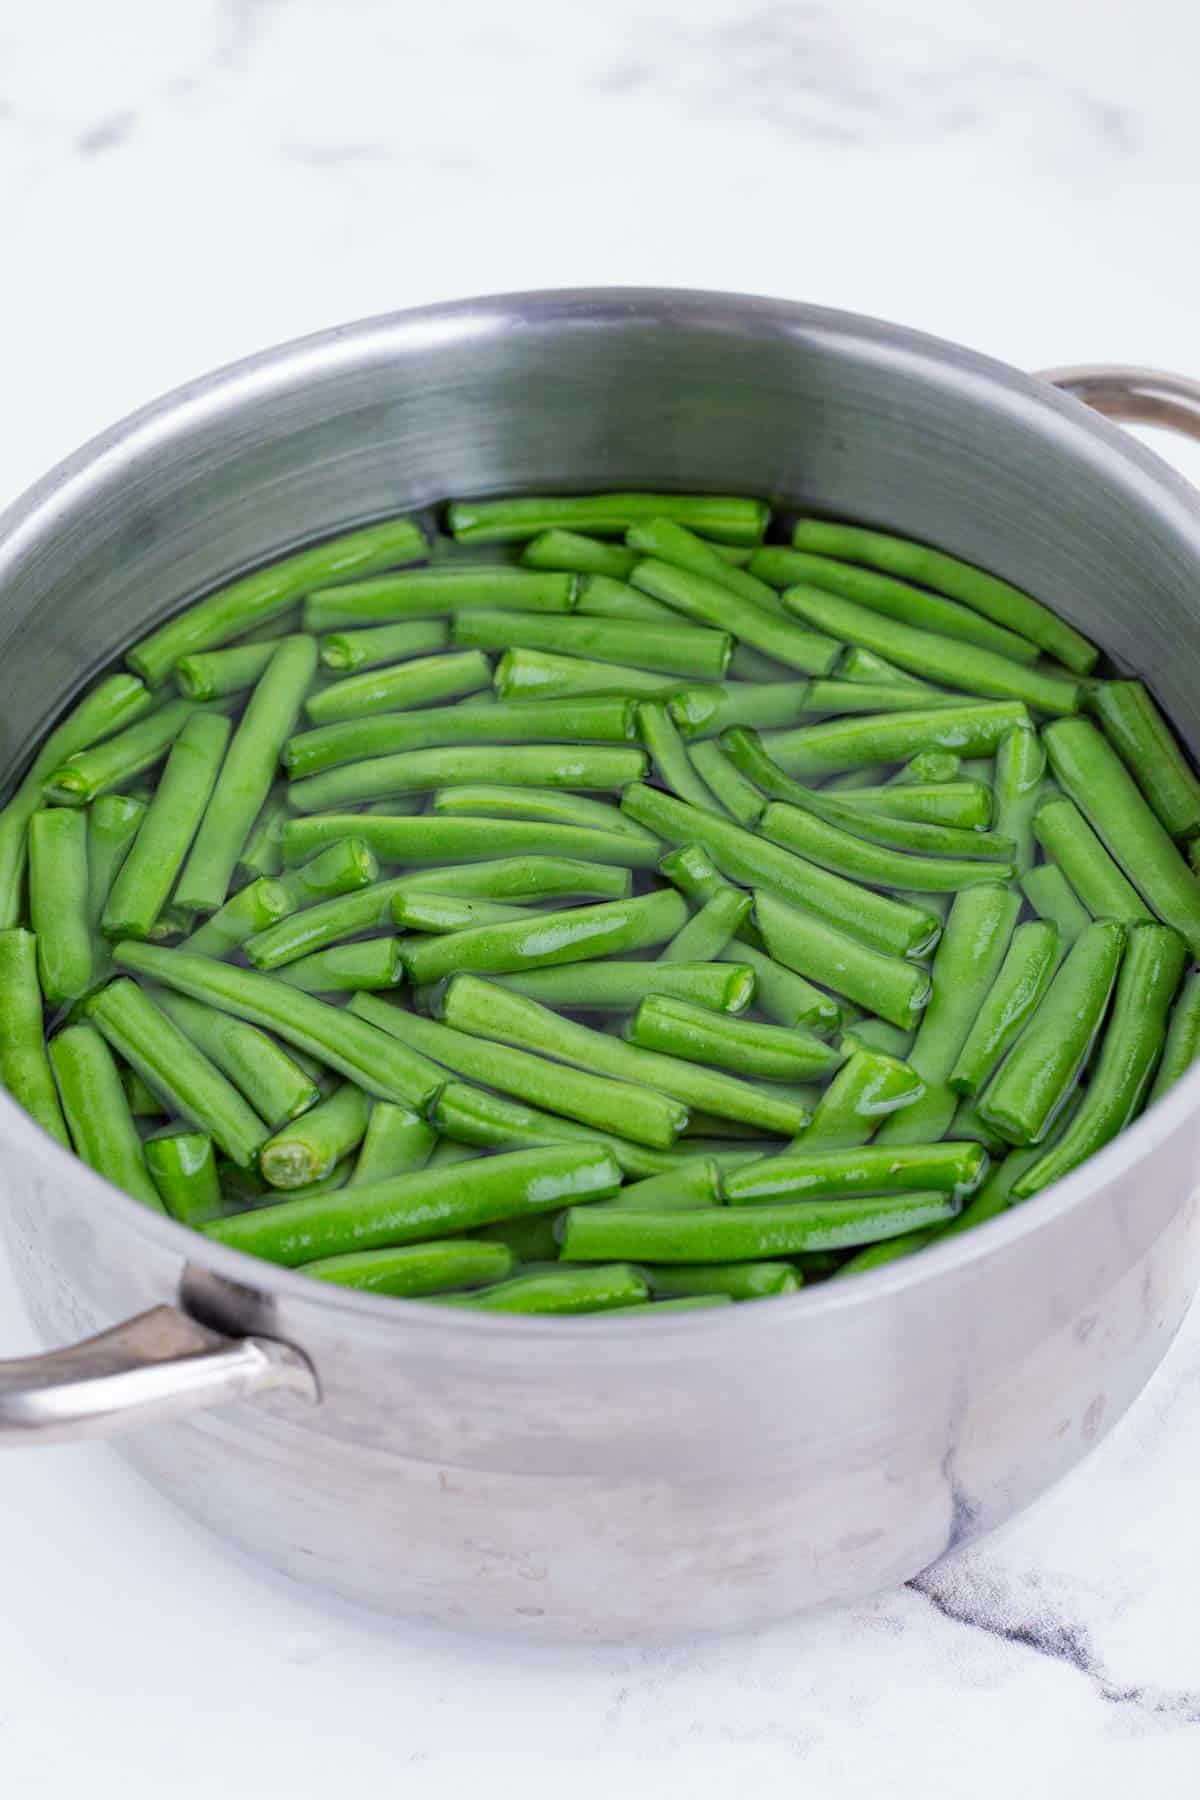 Green beans are blanched in a pot.